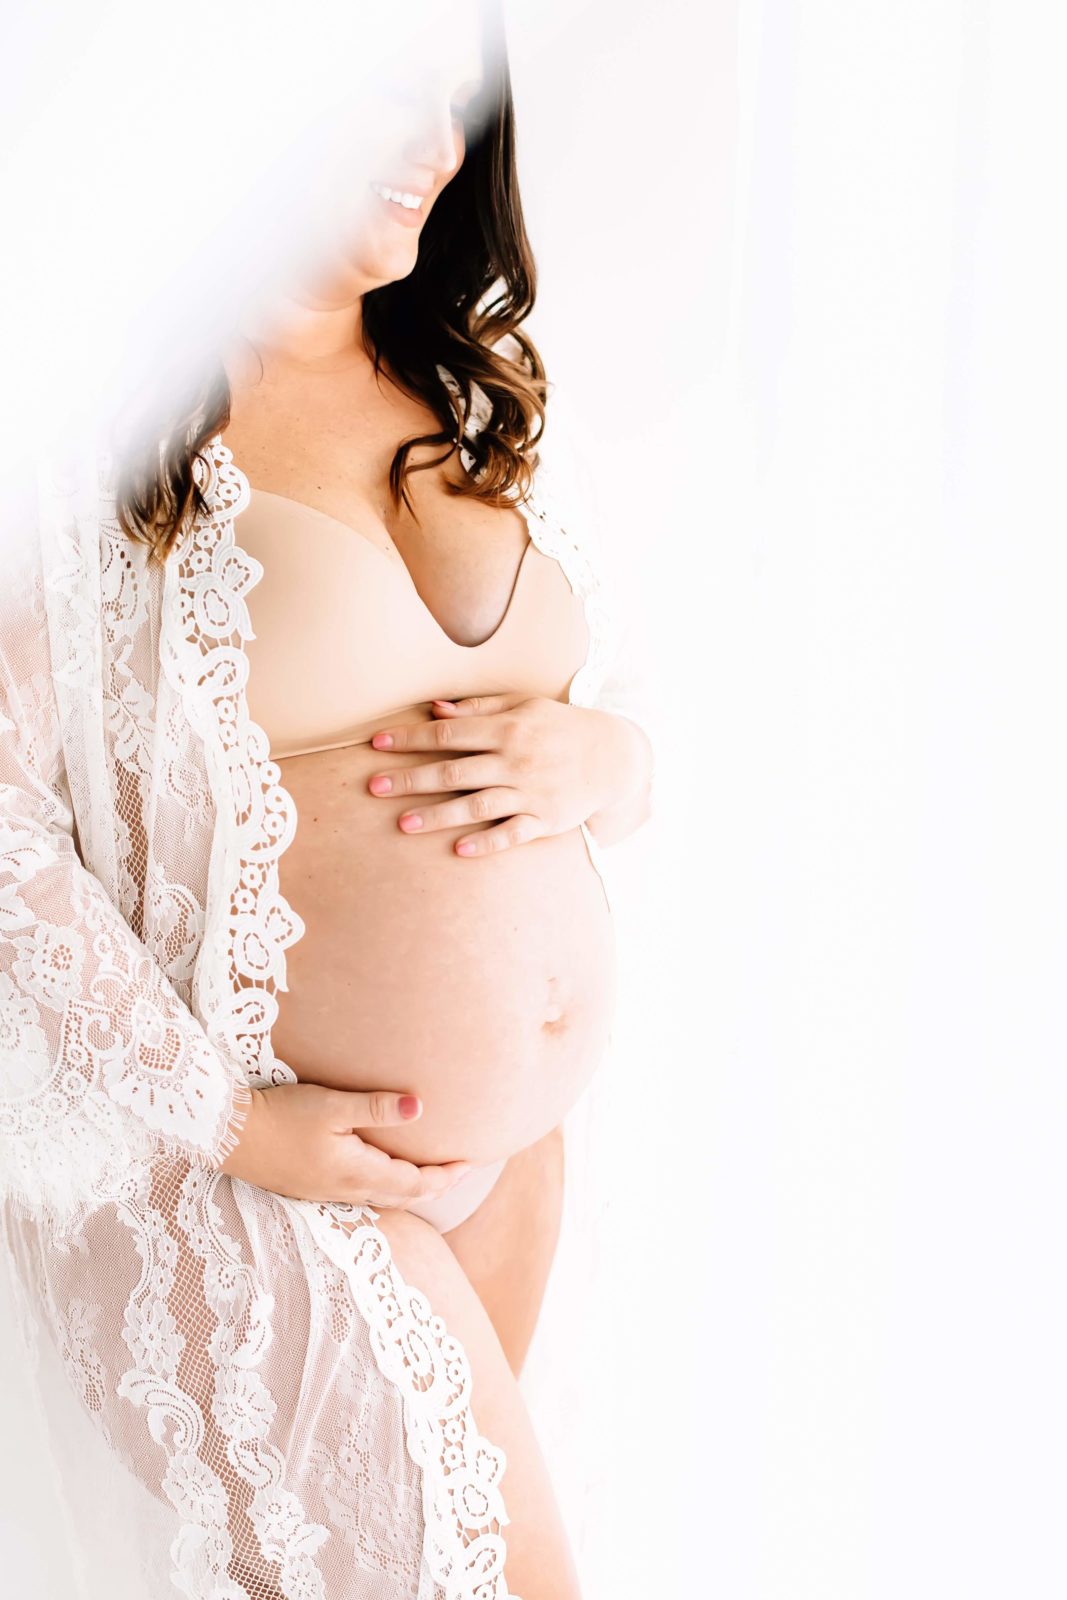 pregnant woman with pink nails curly hair and lace robe during bare belly session